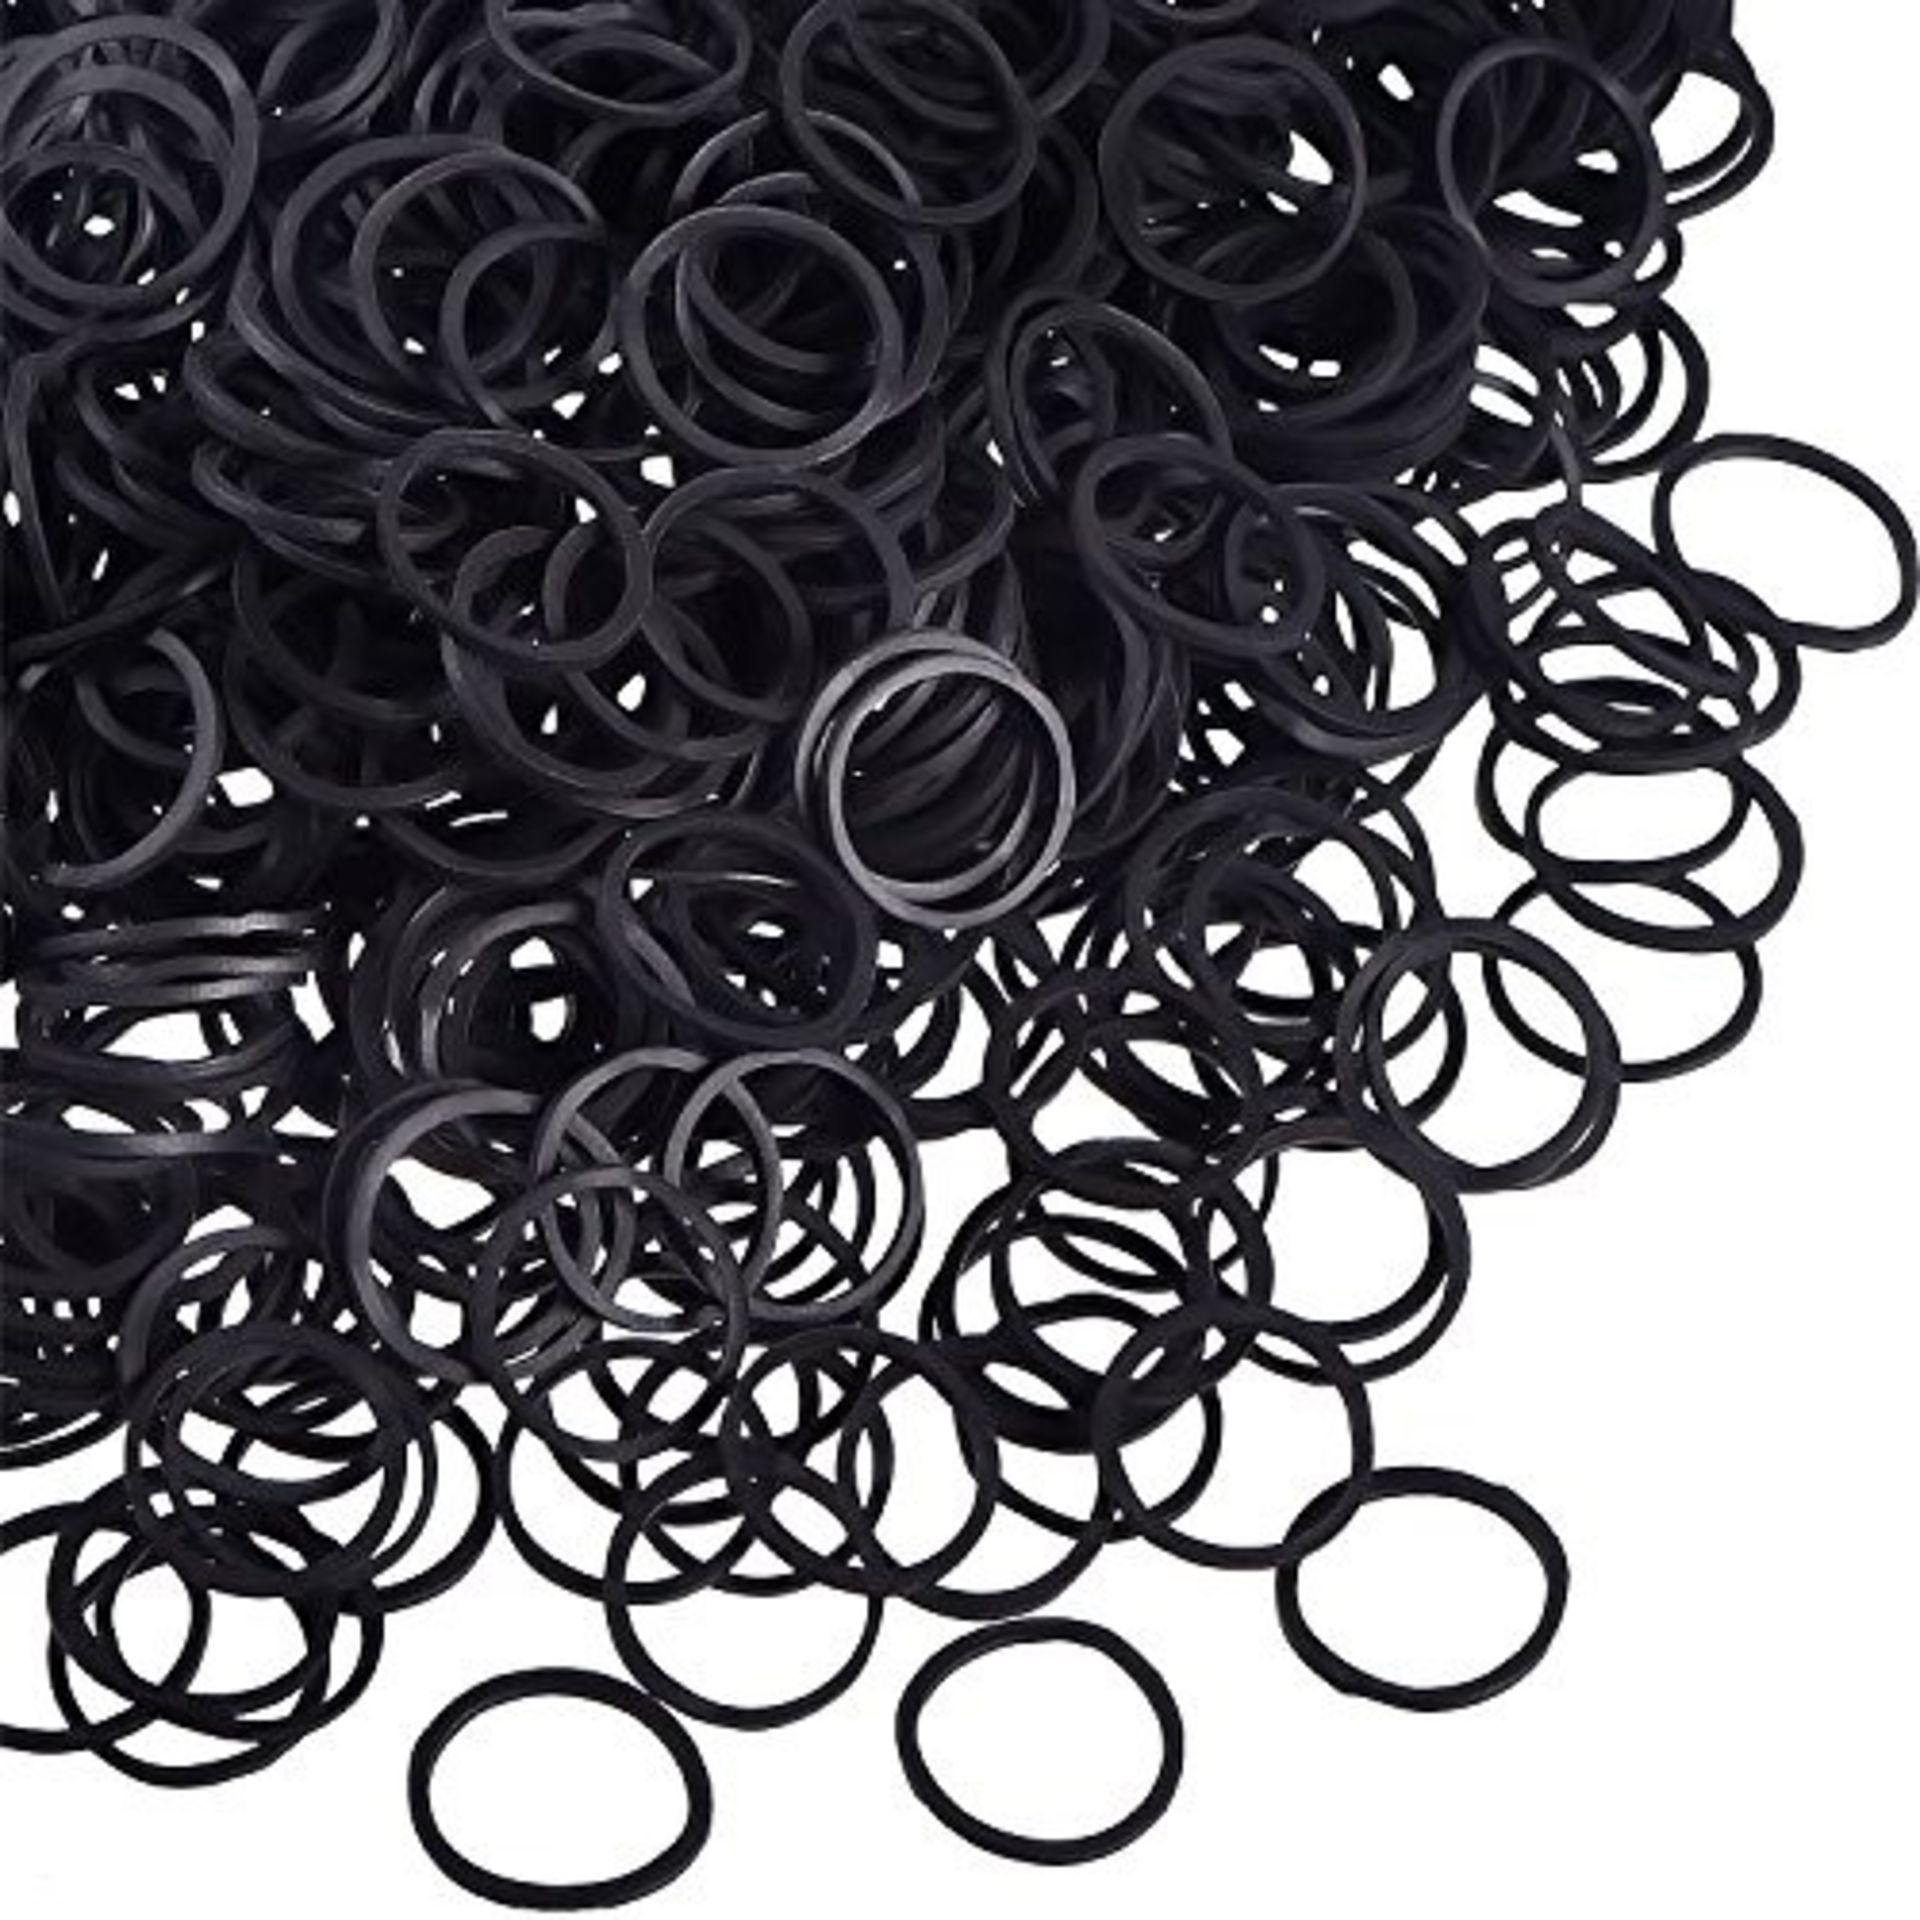 Pack of 1000 Mini Rubber Bands Soft Elastic Bands for Kids Hair, Braids Hair, Wedding - Image 3 of 4